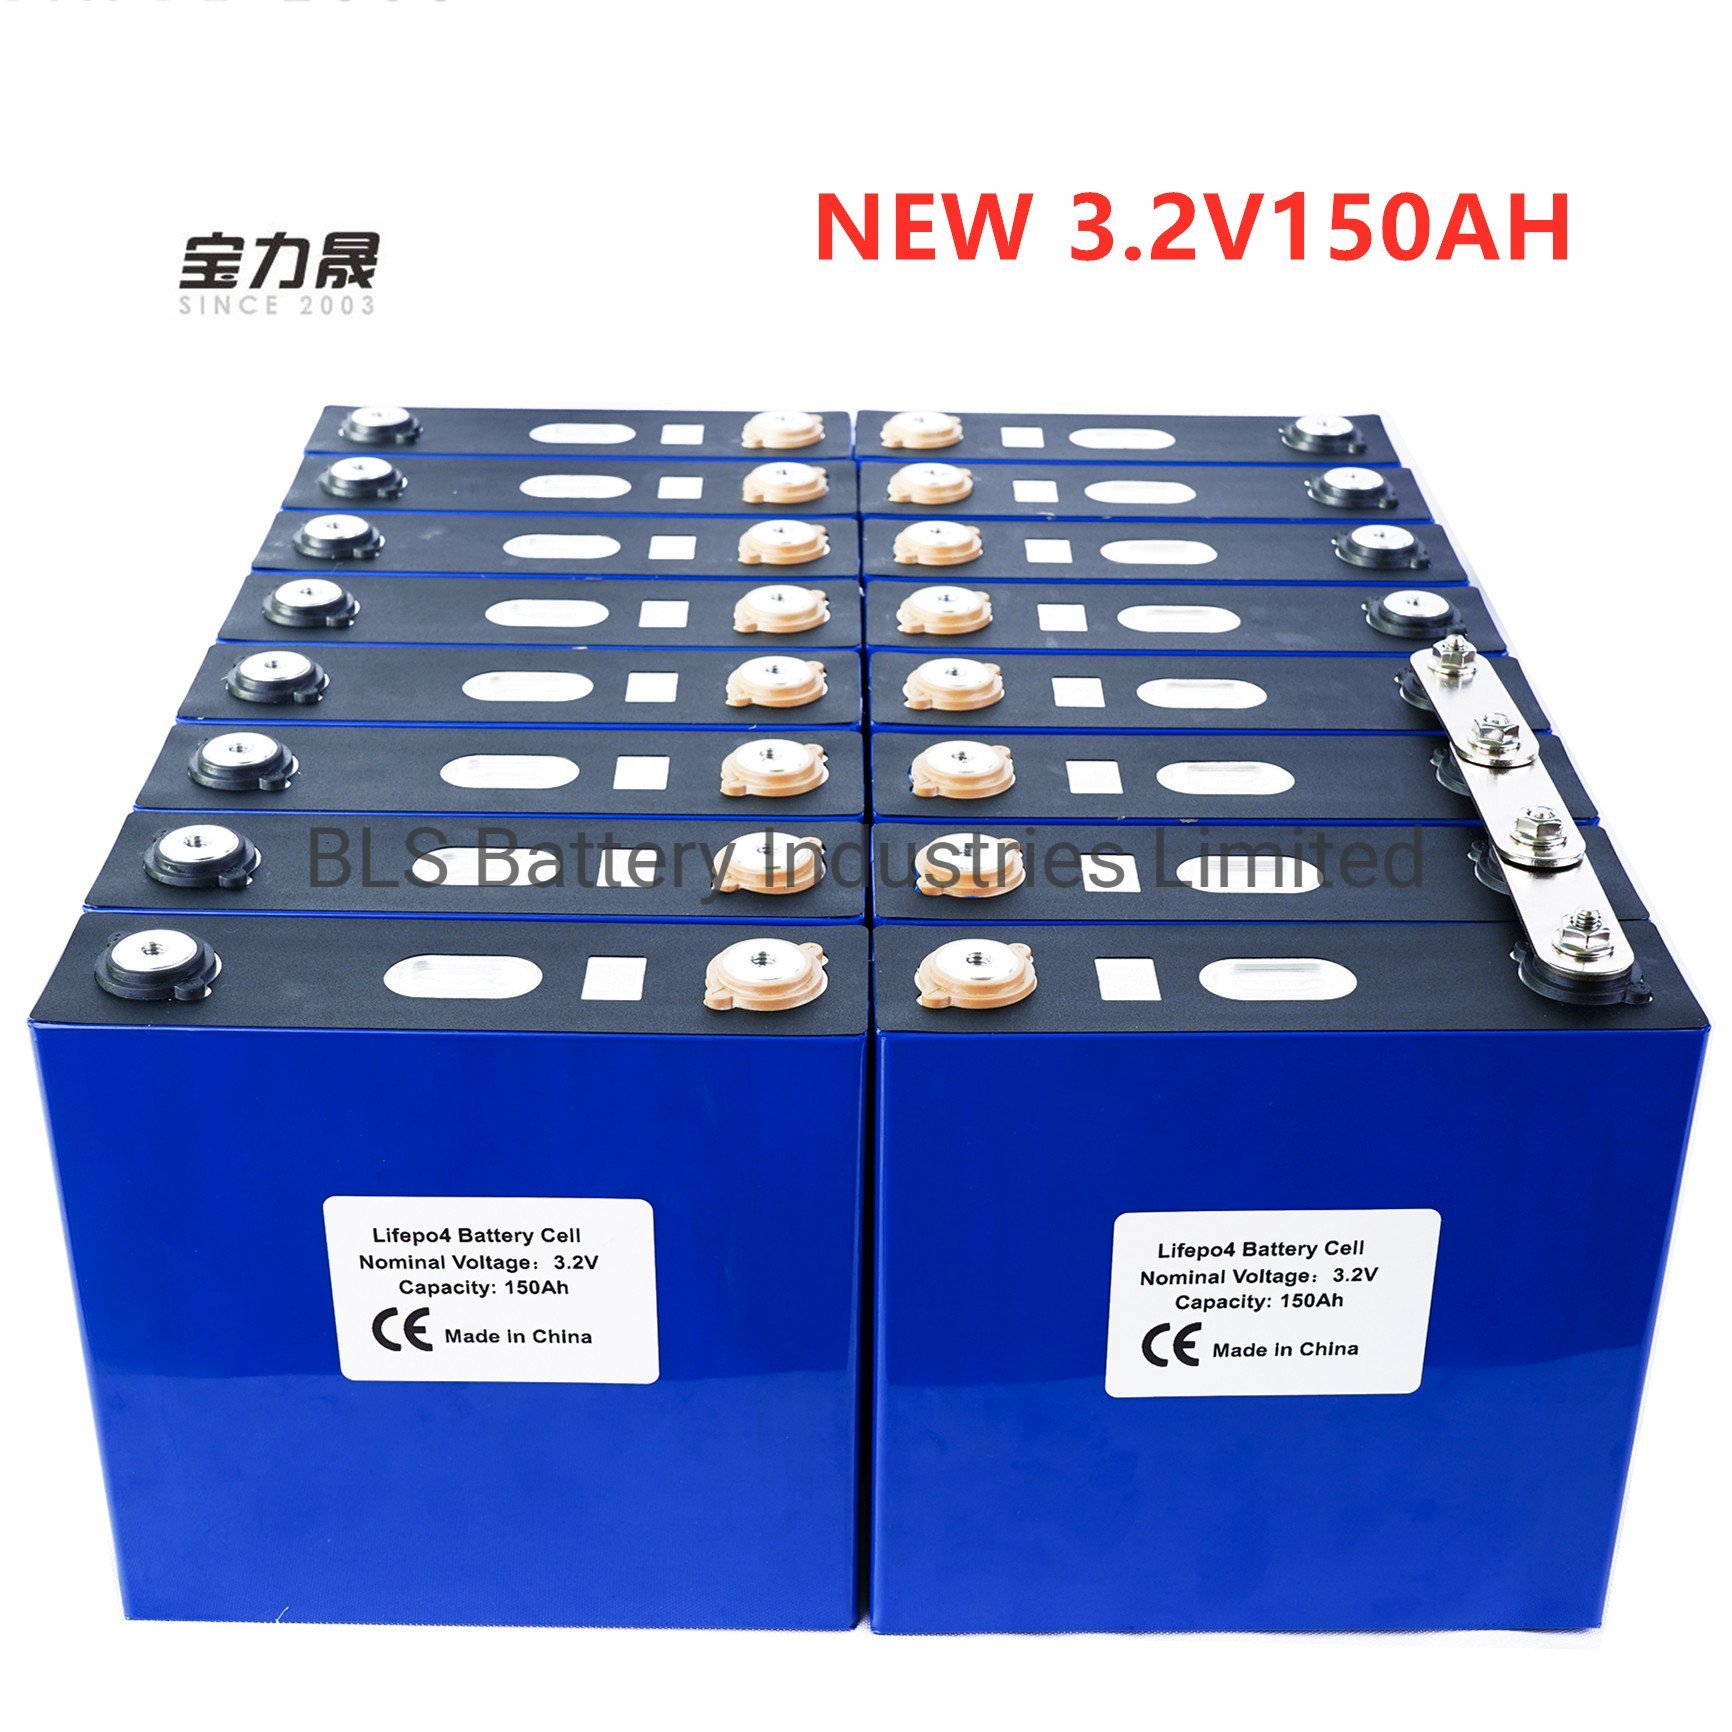 Advantages of a Lithium Iron Phosphate Battery